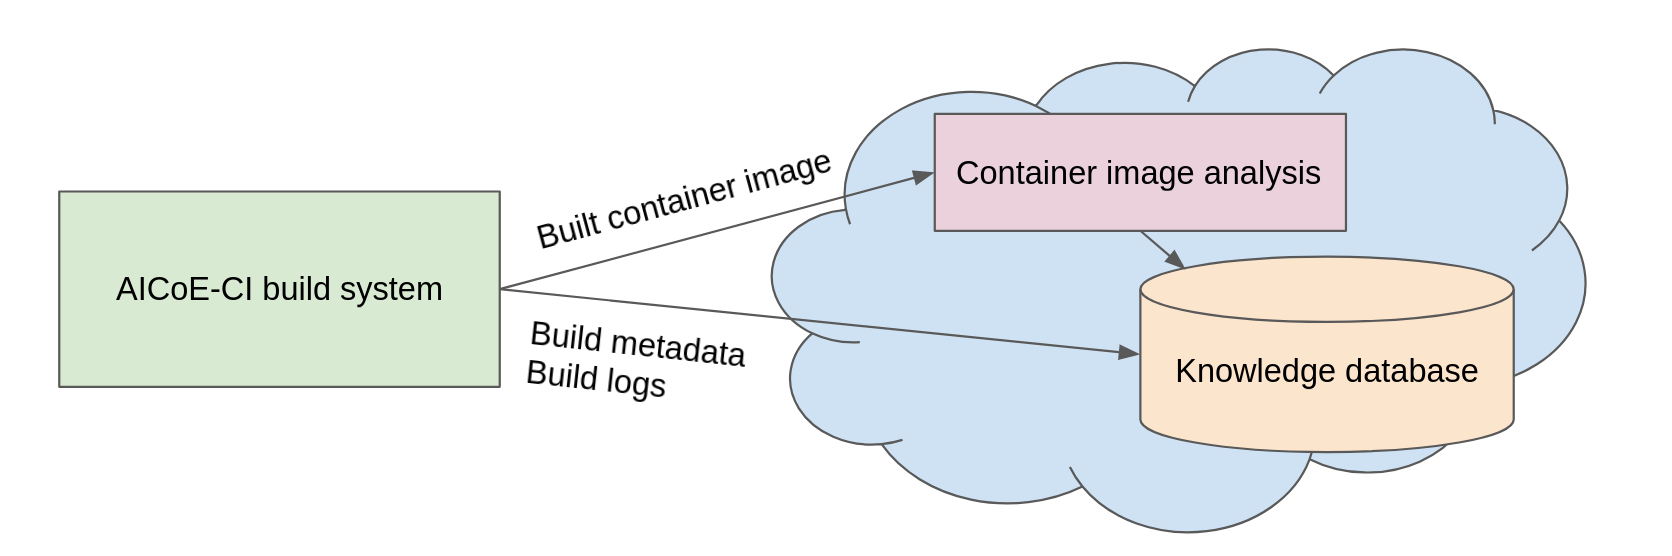 How Thoth gathers information from container image builds done in AICoE-CI.